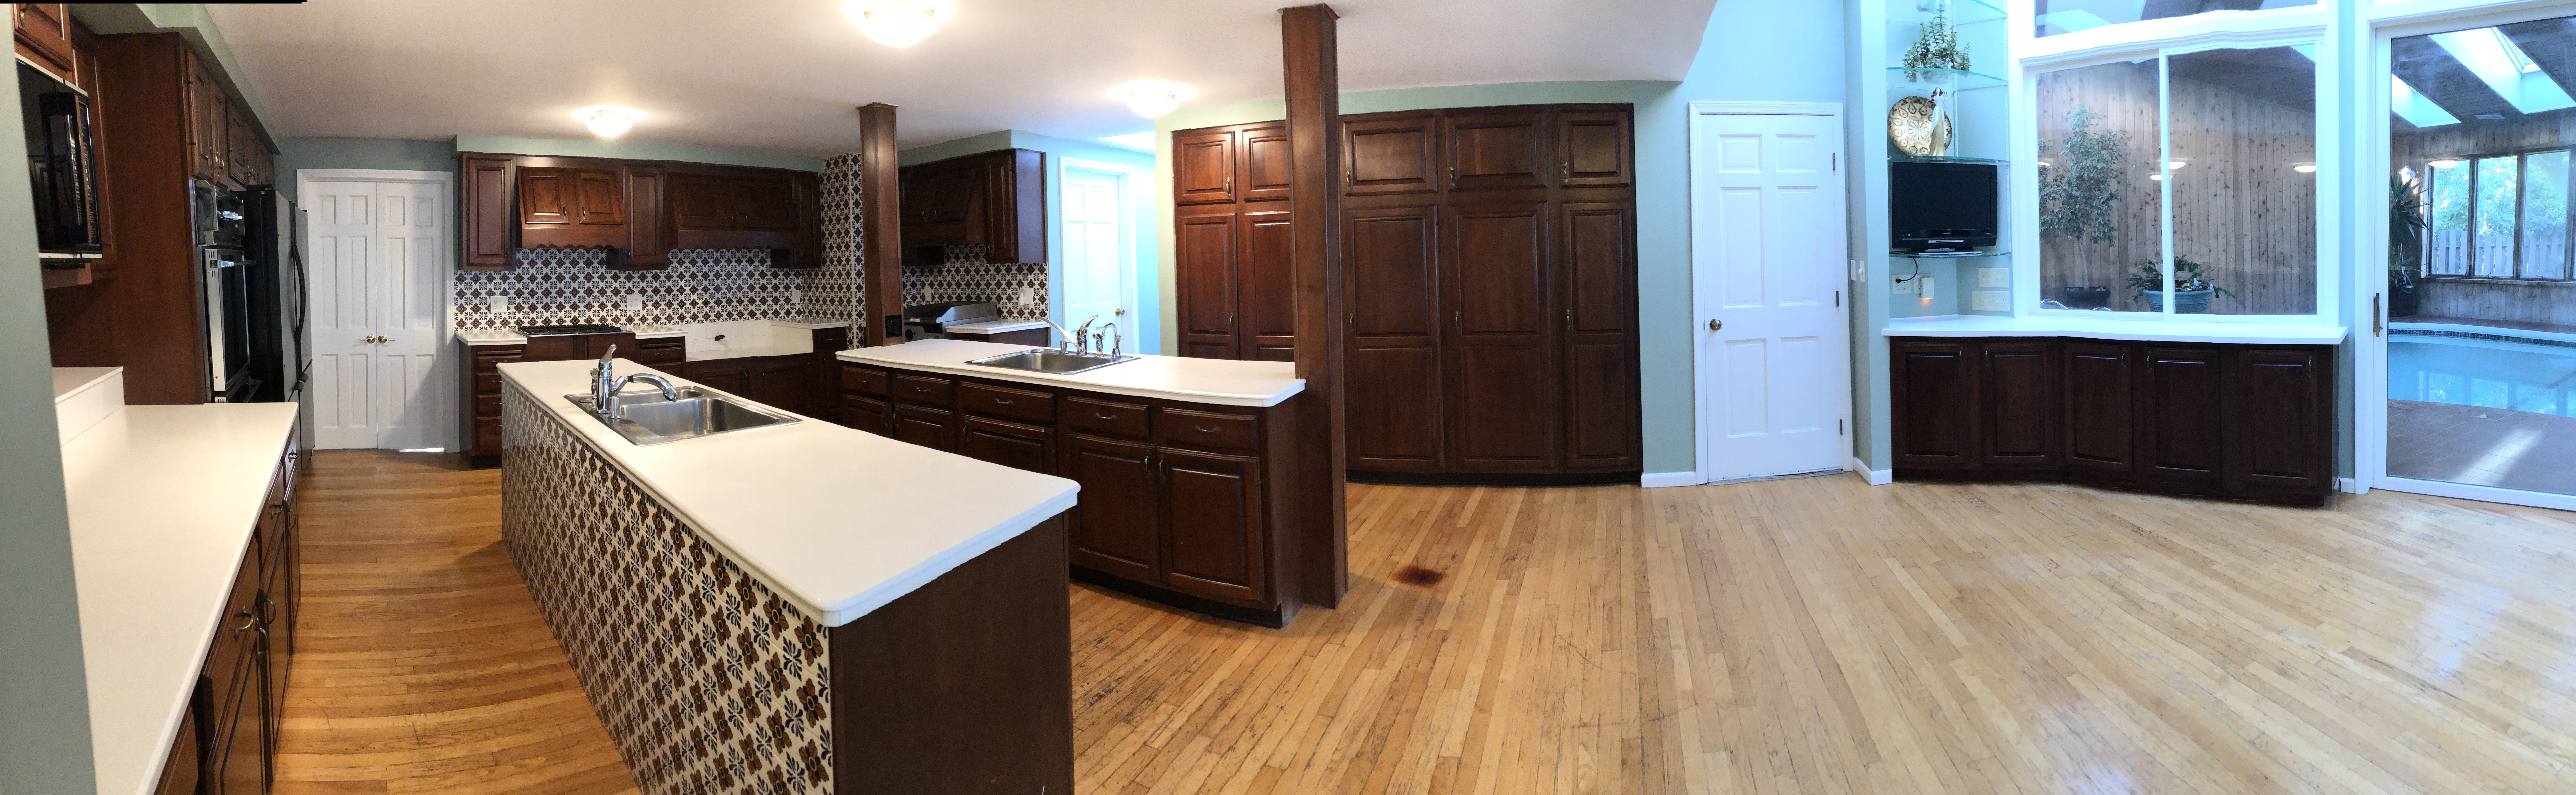 18 Cute Hardwood Floor Refinishing Amherst Ny 2024 free download hardwood floor refinishing amherst ny of 170 brantwood rd amherst ny 14226 realestate com within is6abt7i7l3urm1000000000